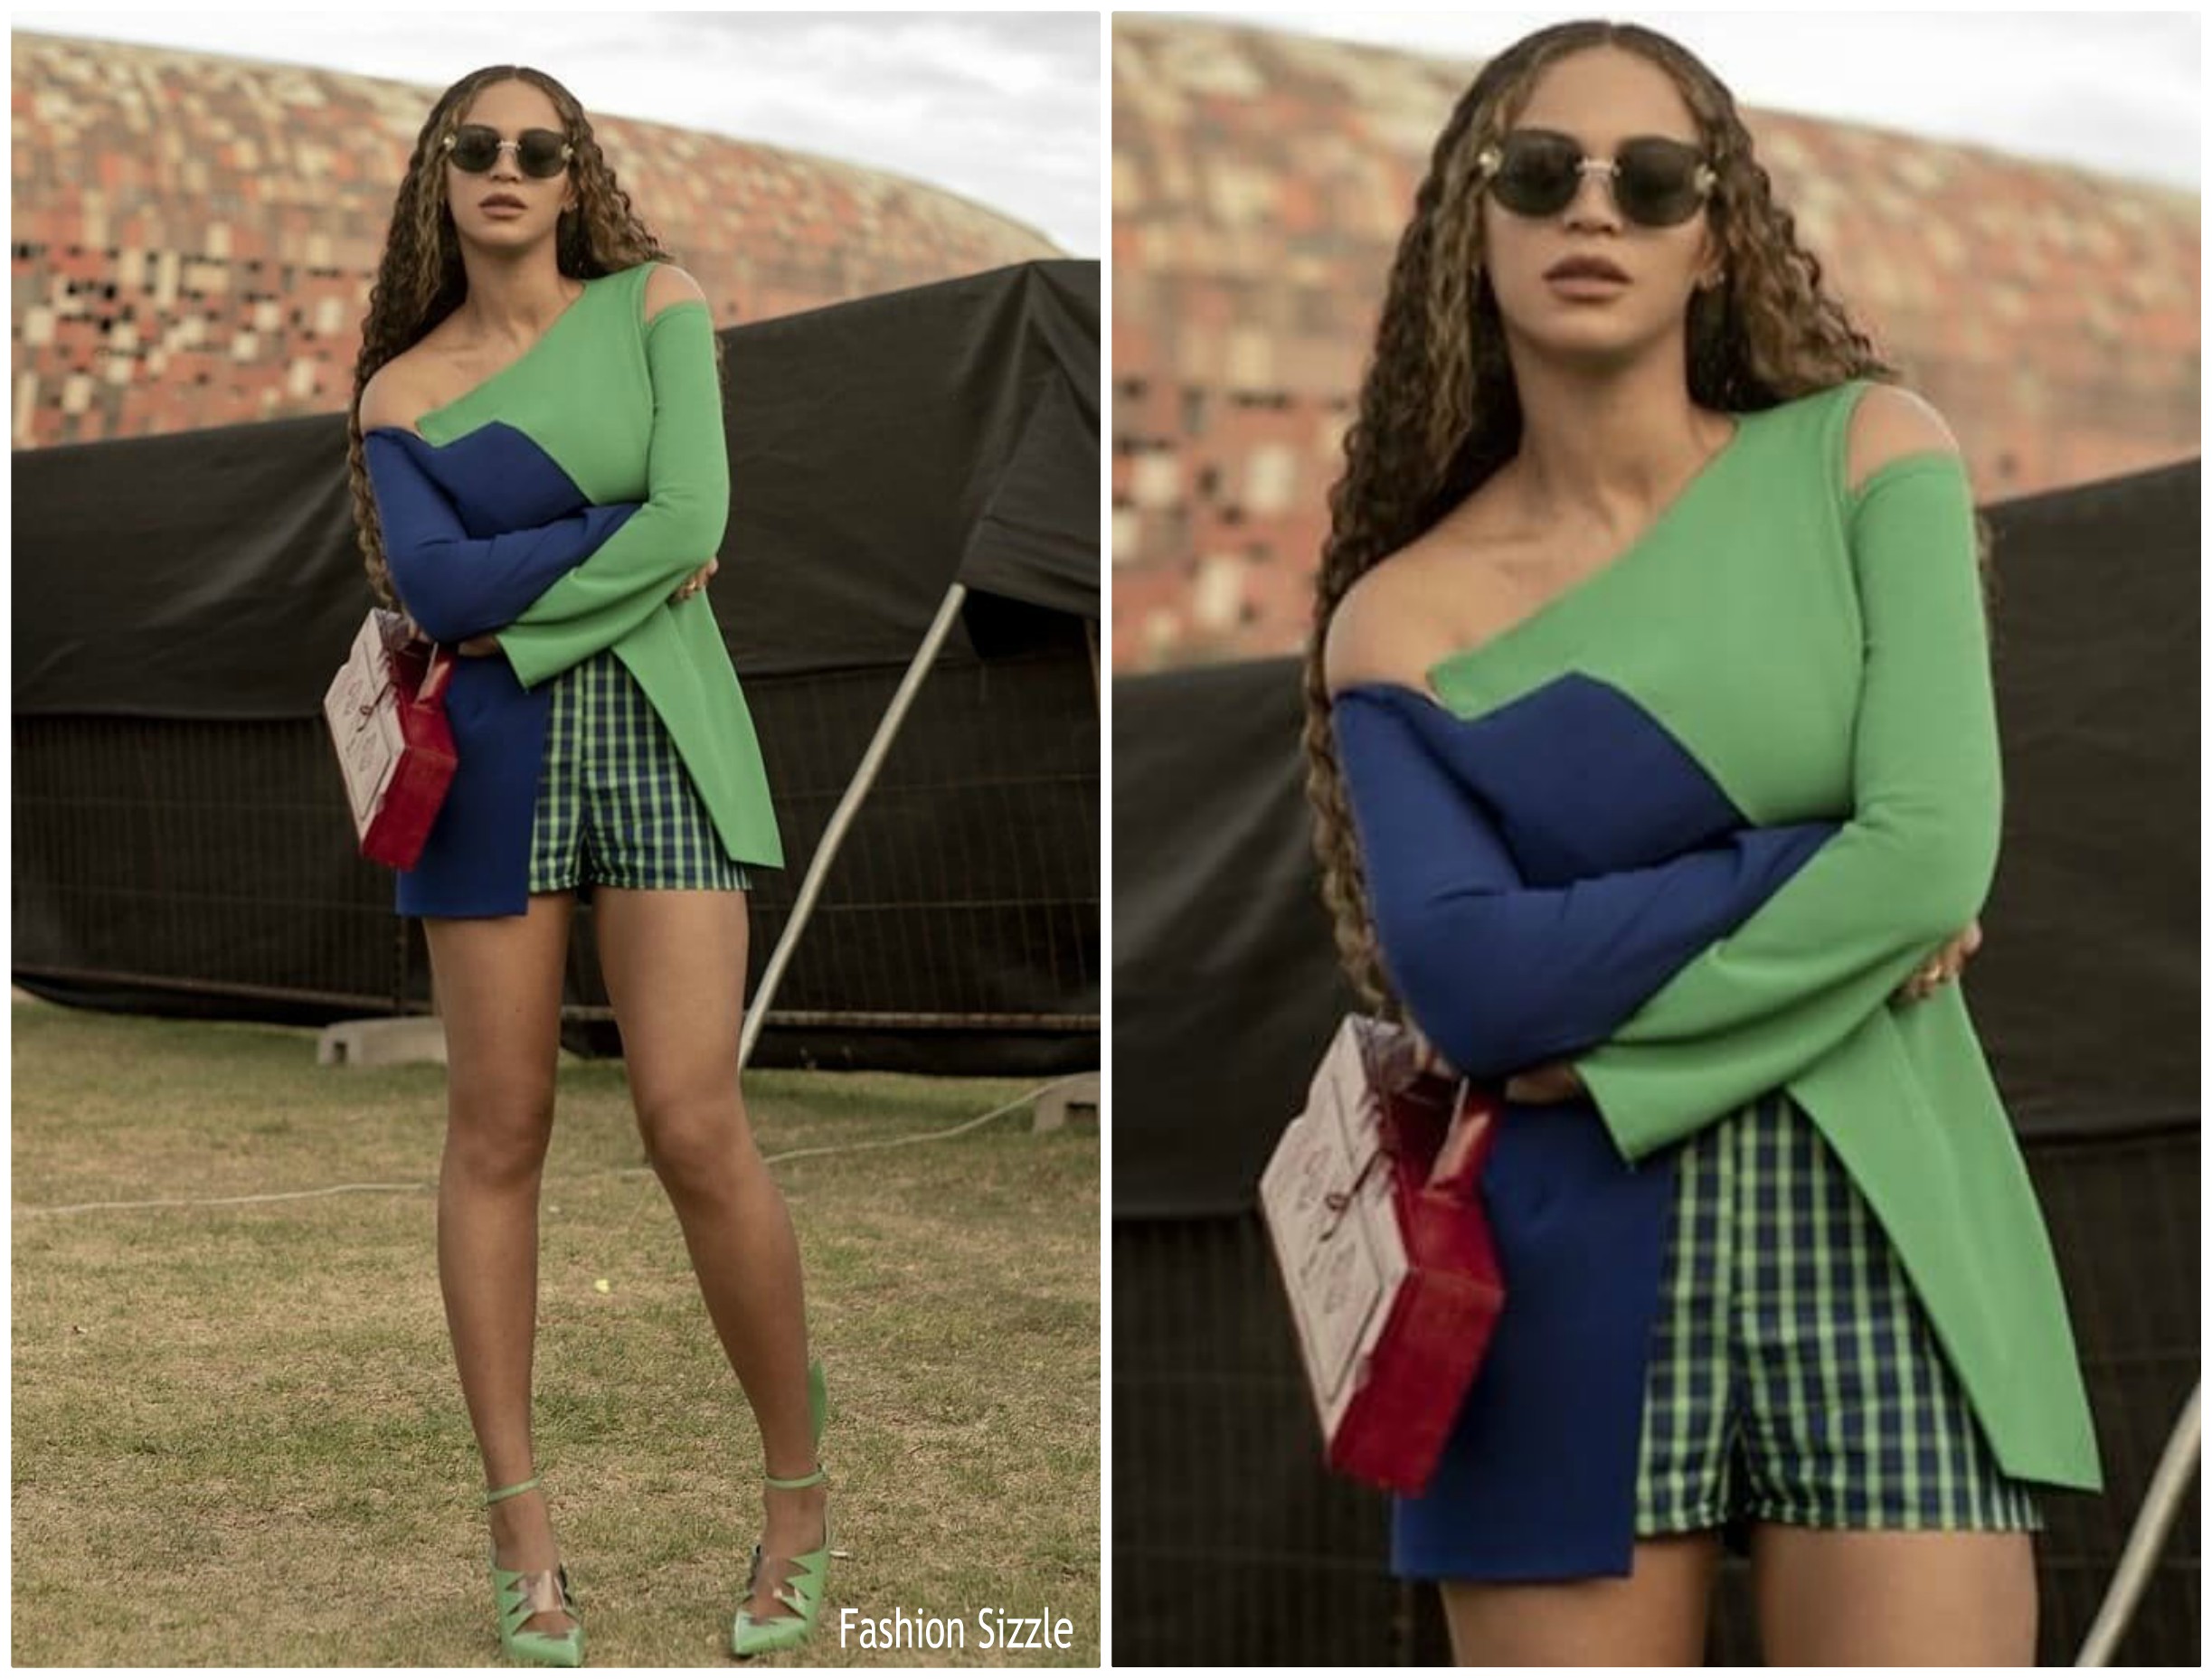 beyonce-knowles-in-mmuso-maxwell-global-citizen-festival-south-africa-mandela-100